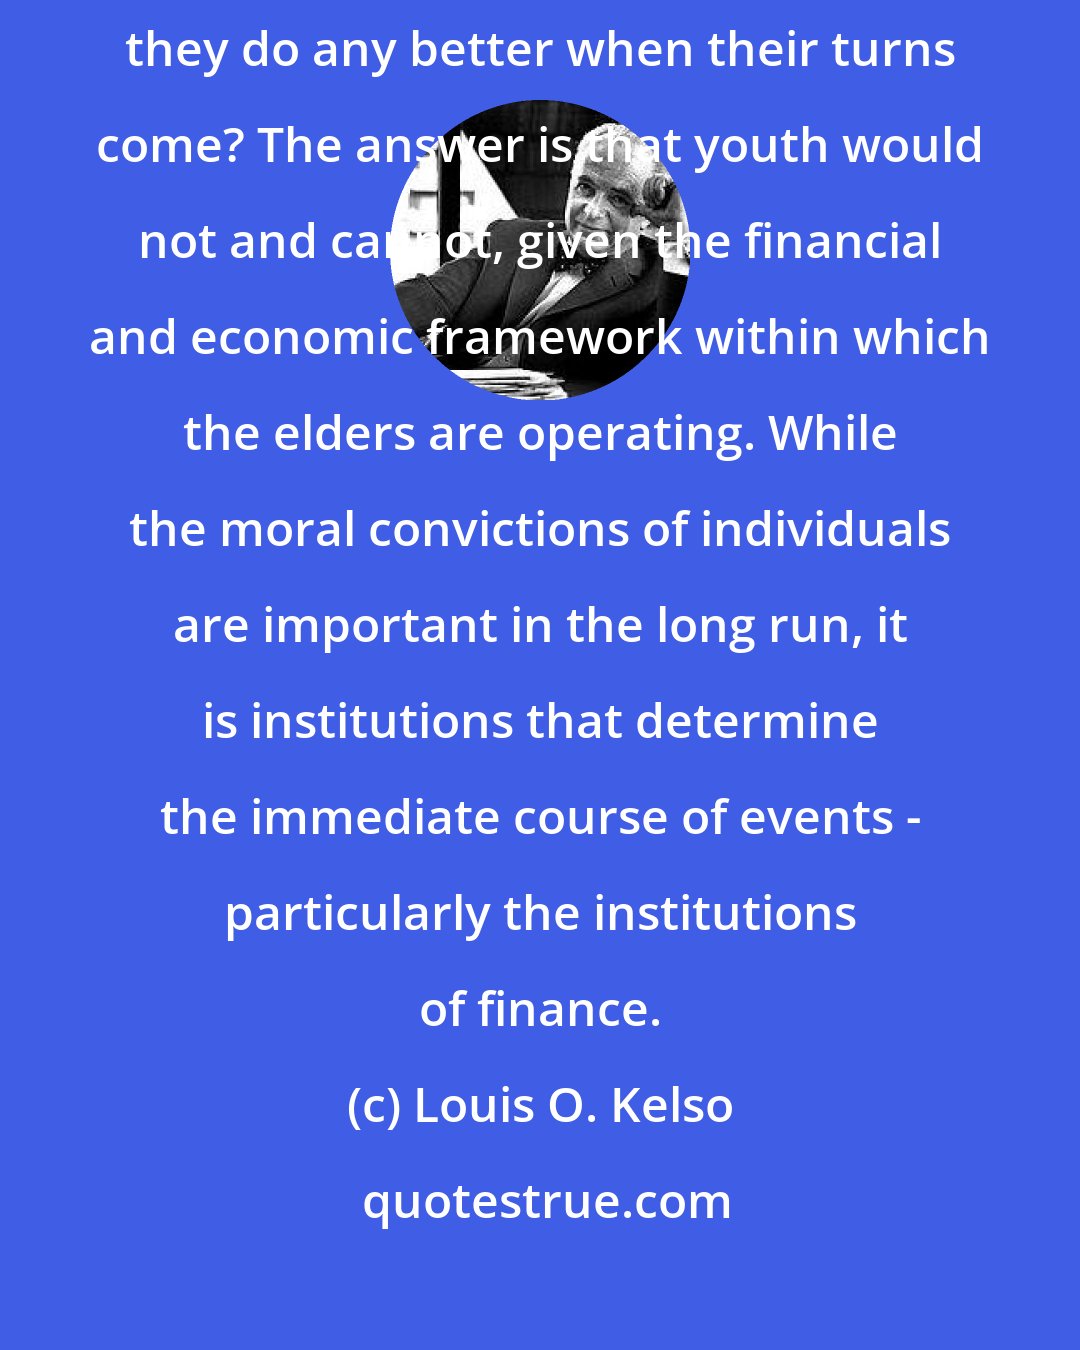 Louis O. Kelso: But would the young do any better under the same circumstances? Will they do any better when their turns come? The answer is that youth would not and cannot, given the financial and economic framework within which the elders are operating. While the moral convictions of individuals are important in the long run, it is institutions that determine the immediate course of events - particularly the institutions of finance.